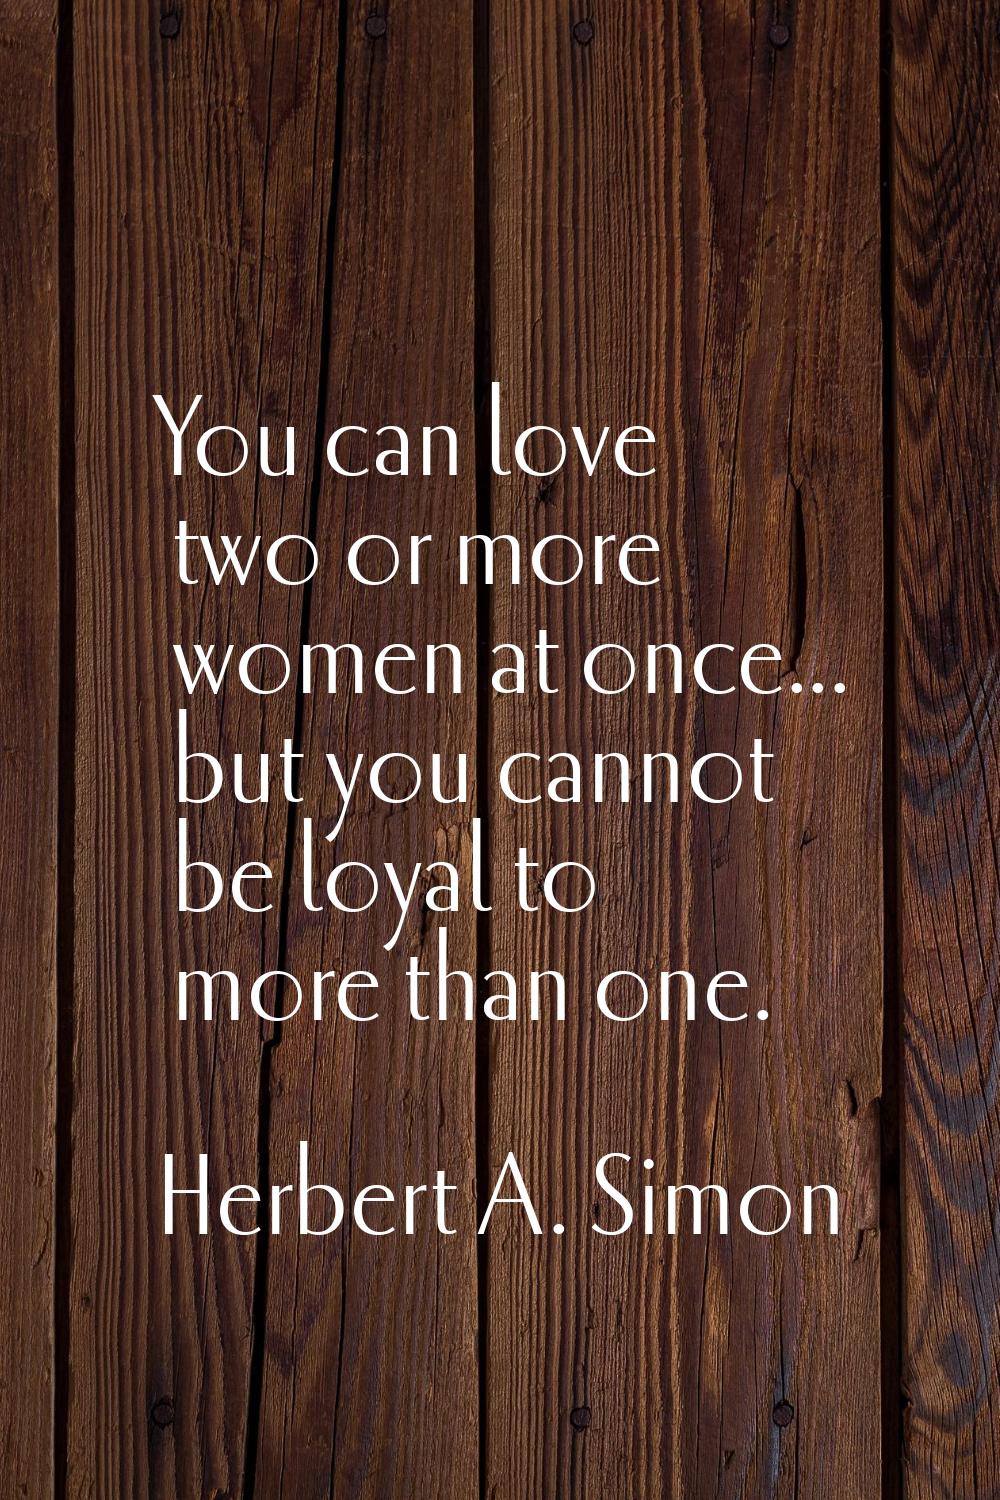 You can love two or more women at once... but you cannot be loyal to more than one.